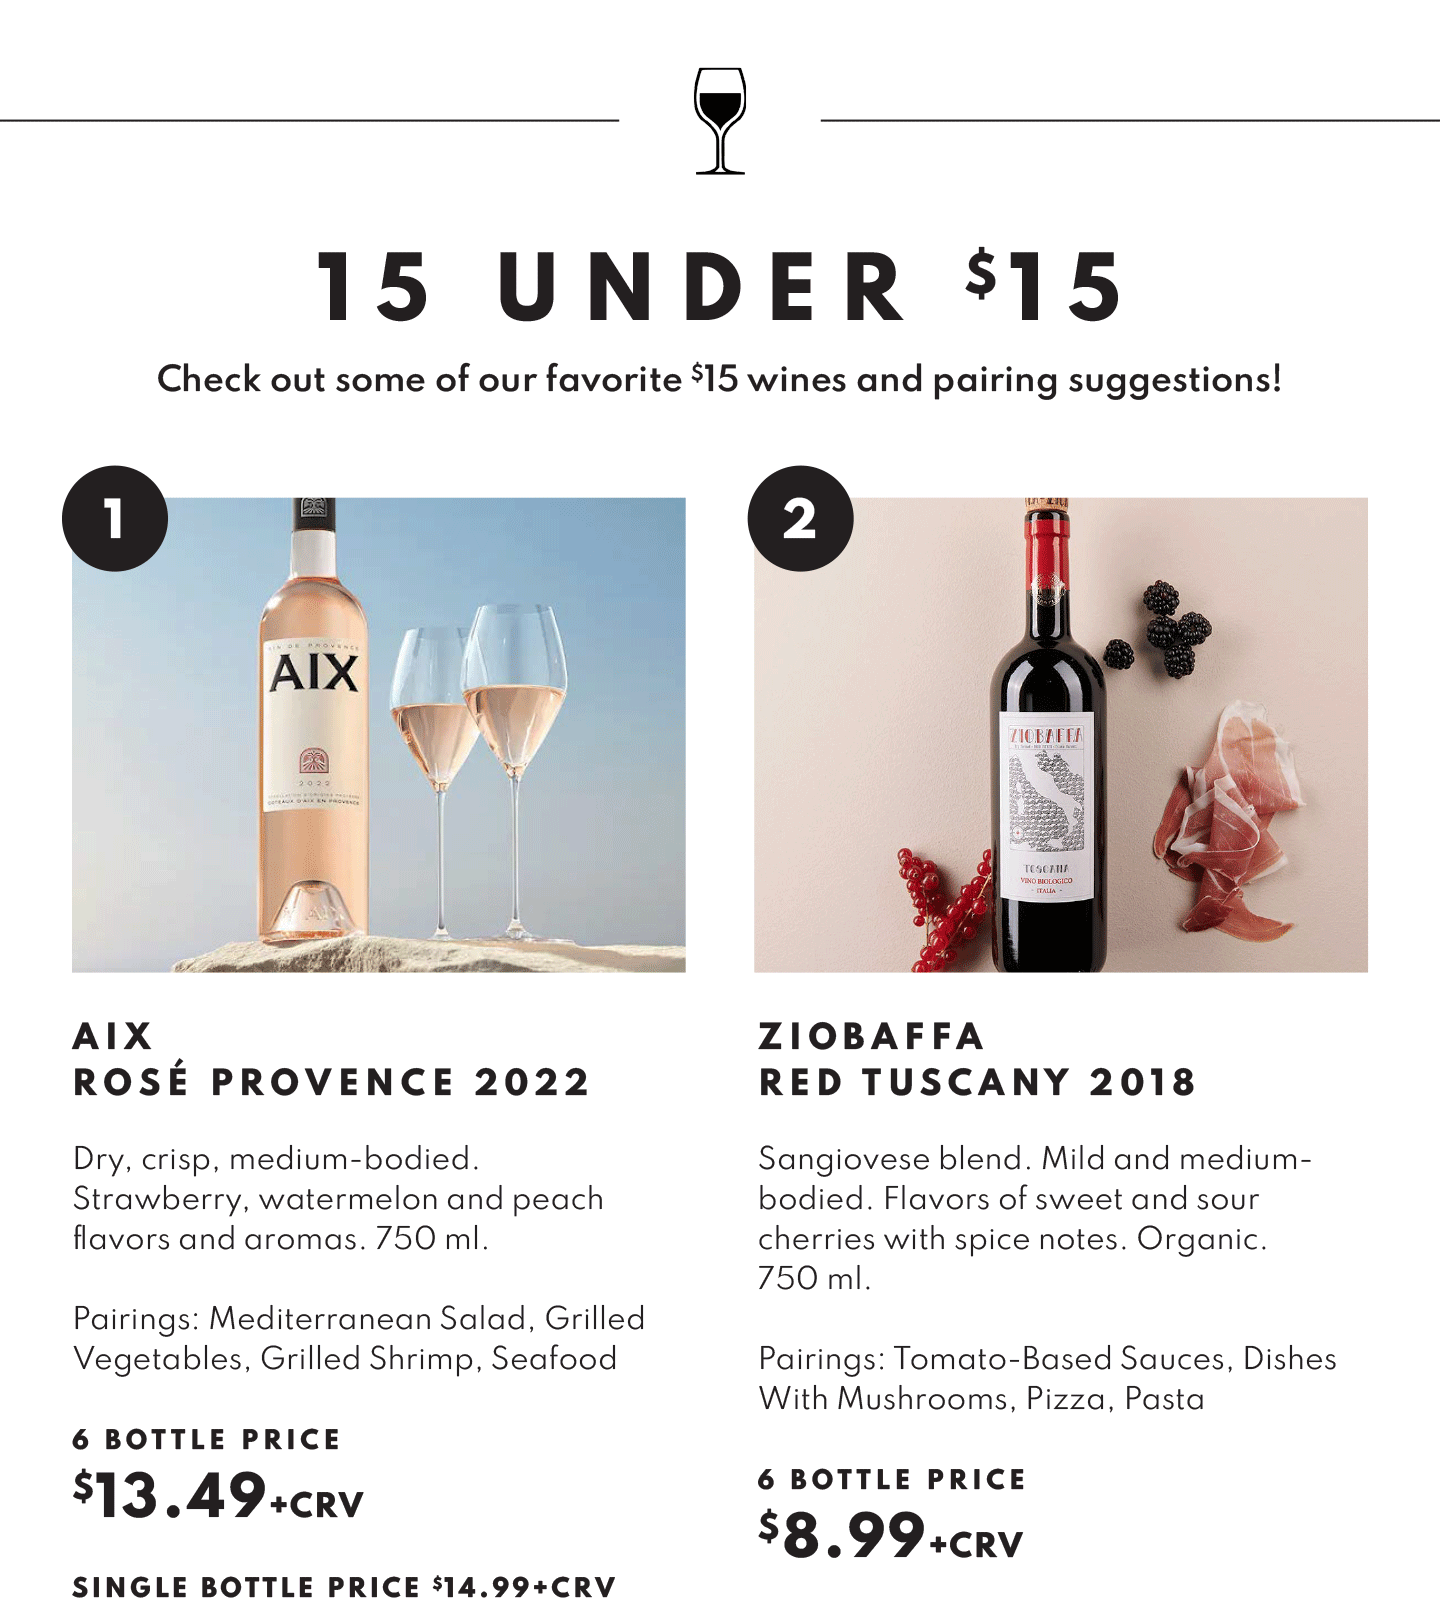 AIX Rose Provence, 2022 6 bottle price $13.49 and Zibaffa Red Tuscany, 2018 6 bottle price $8.99